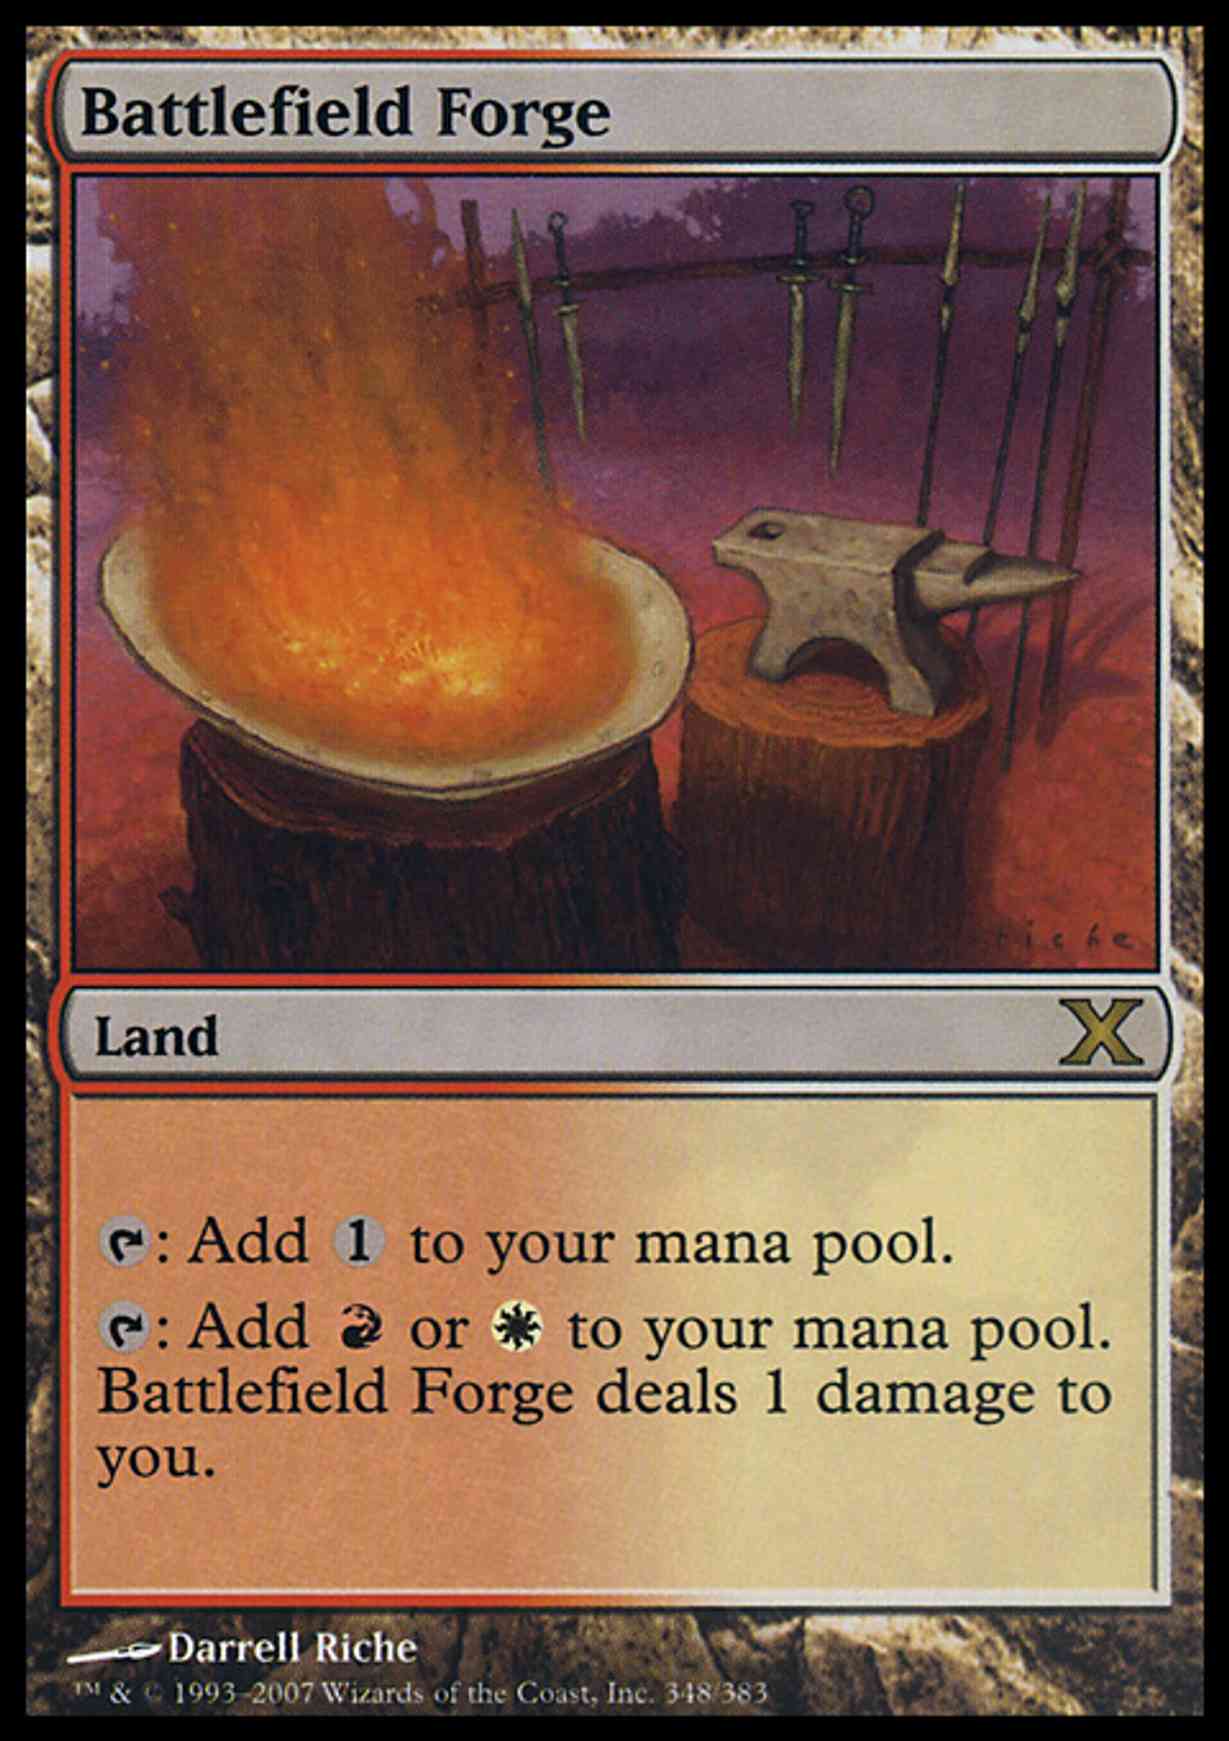 Battlefield Forge magic card front